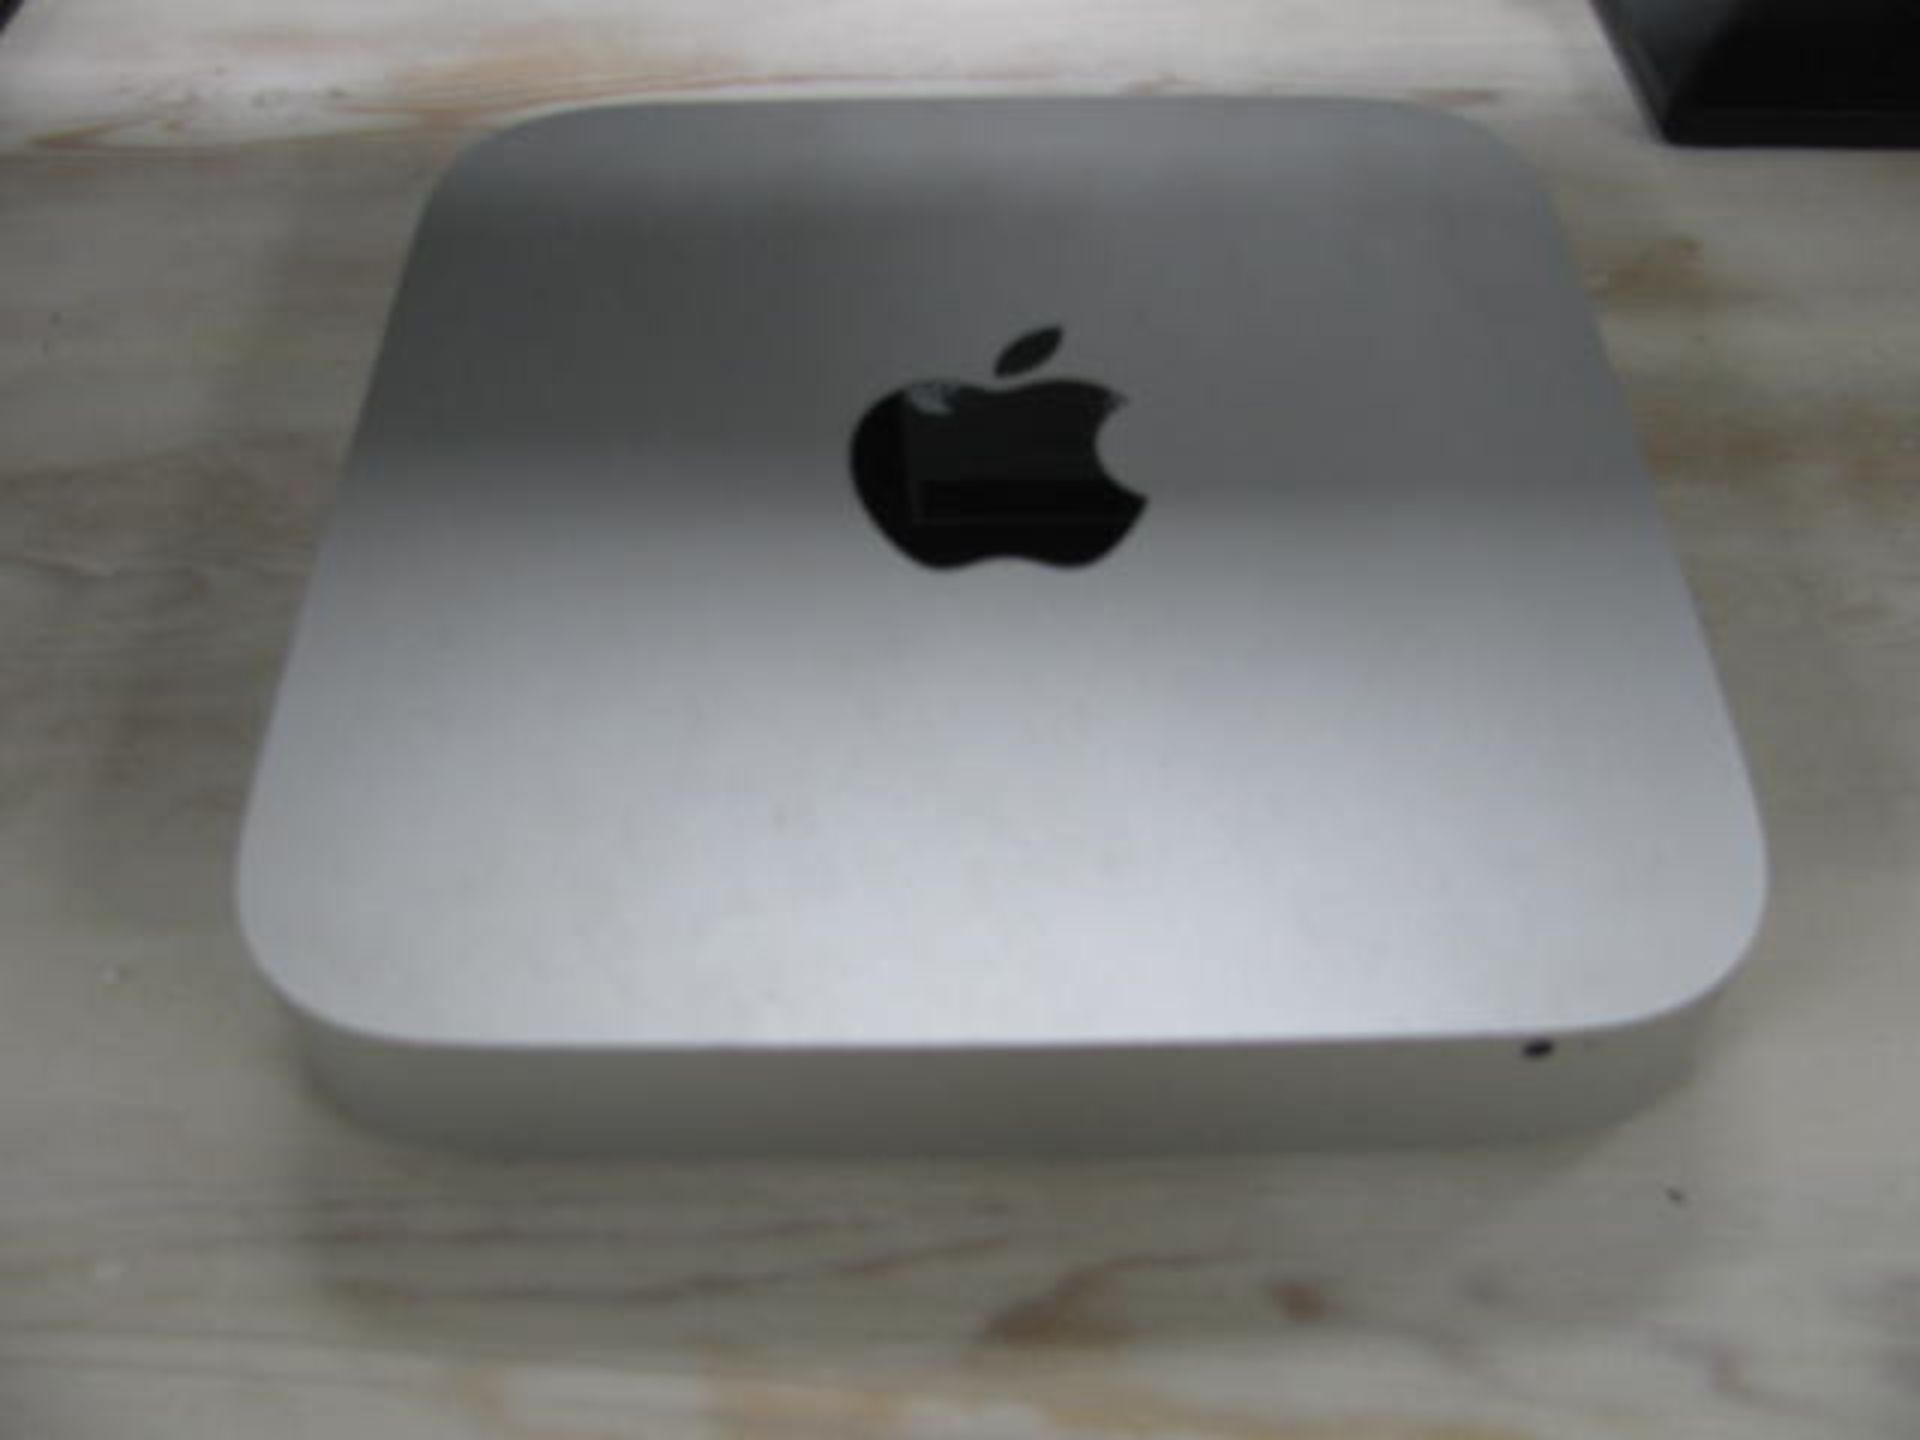 Apple Mac mini base unit with (2) LG flat screens, keyboard and mouse - Image 3 of 4